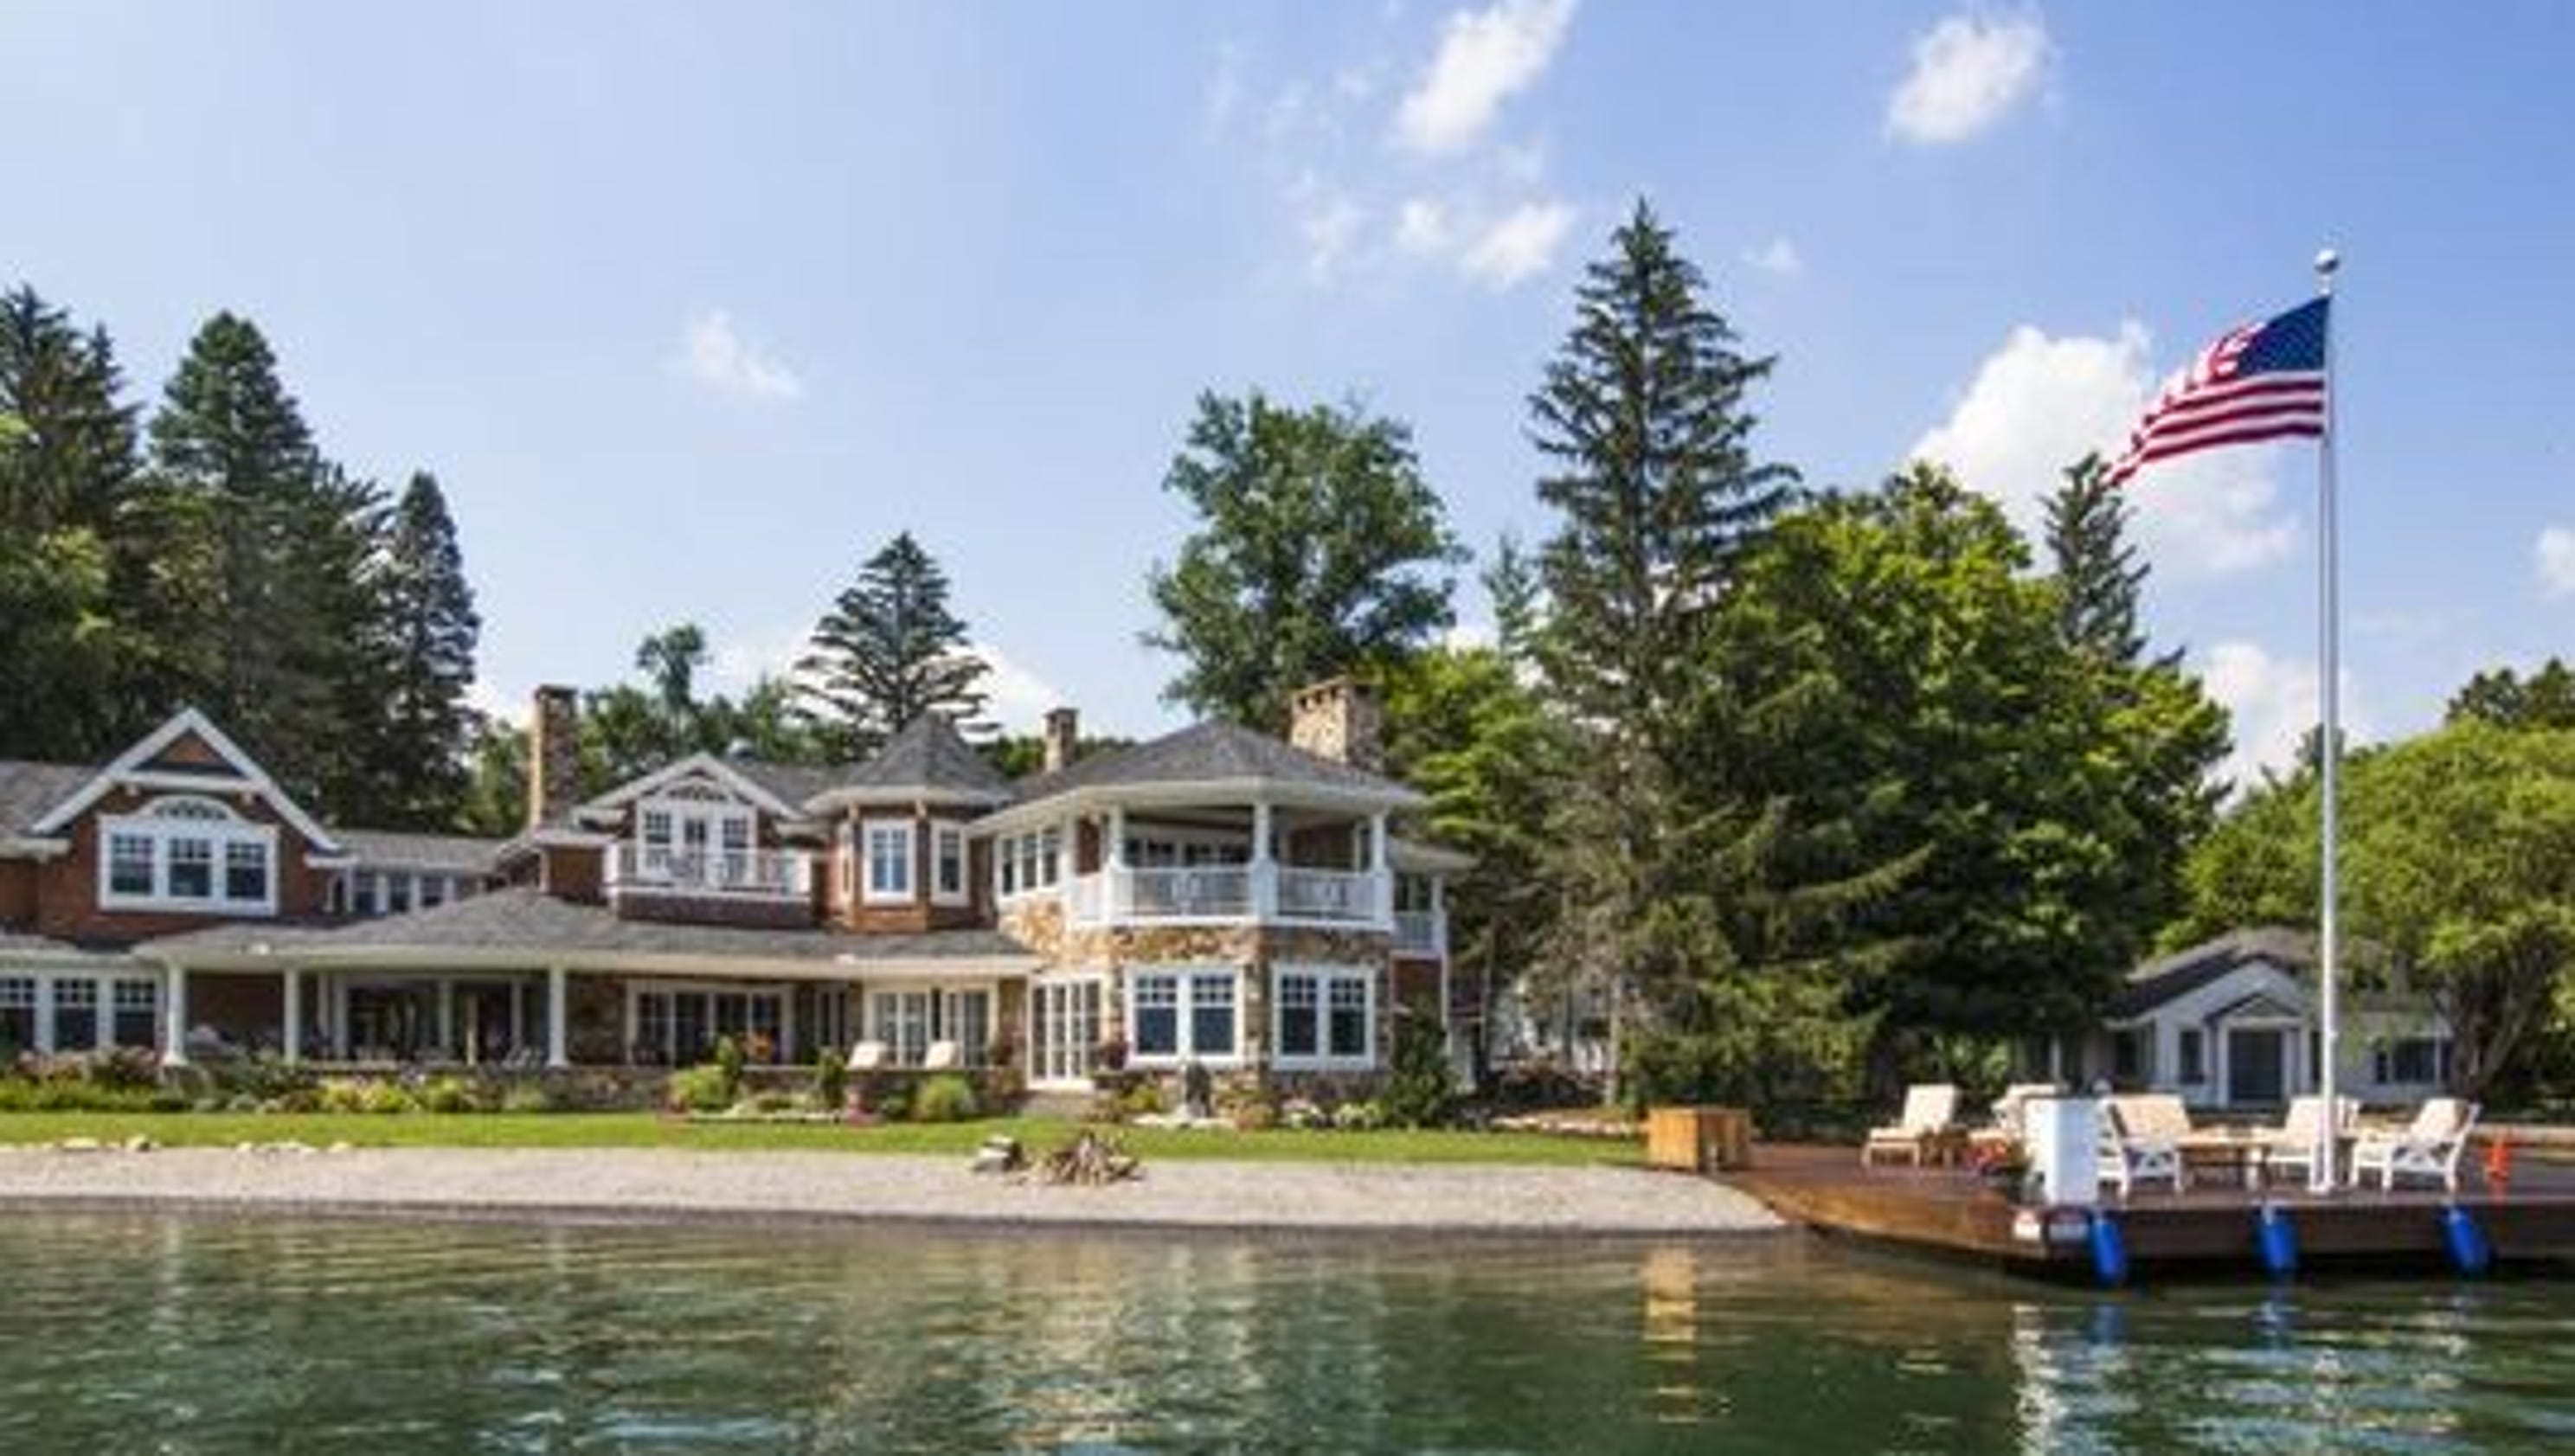 Canandaigua Lake home on market for $7.15M3200 x 1680